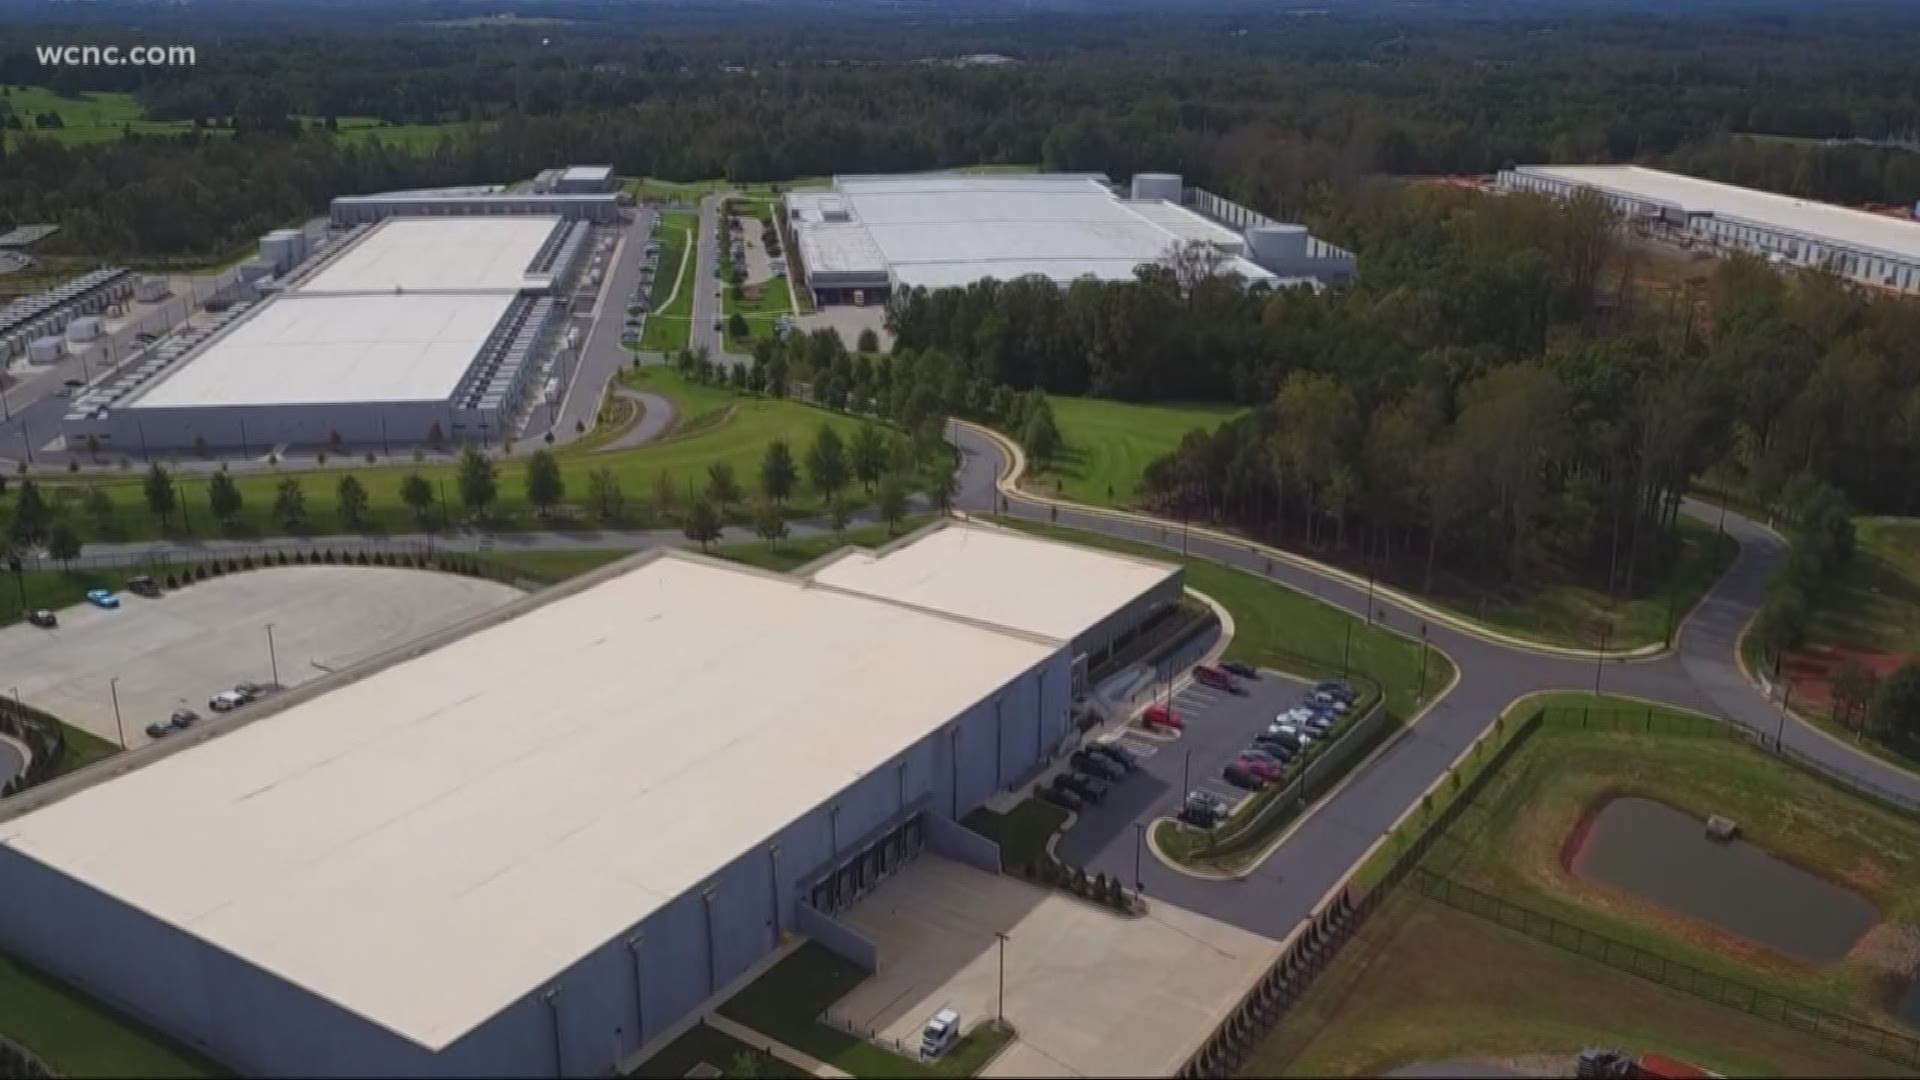 After watching Google open its data center in neighboring Caldwell County, Catawba County economic development corporation president Scott Millar says the county began working with Duke Energy to develop and market plots of land specifically for server fa